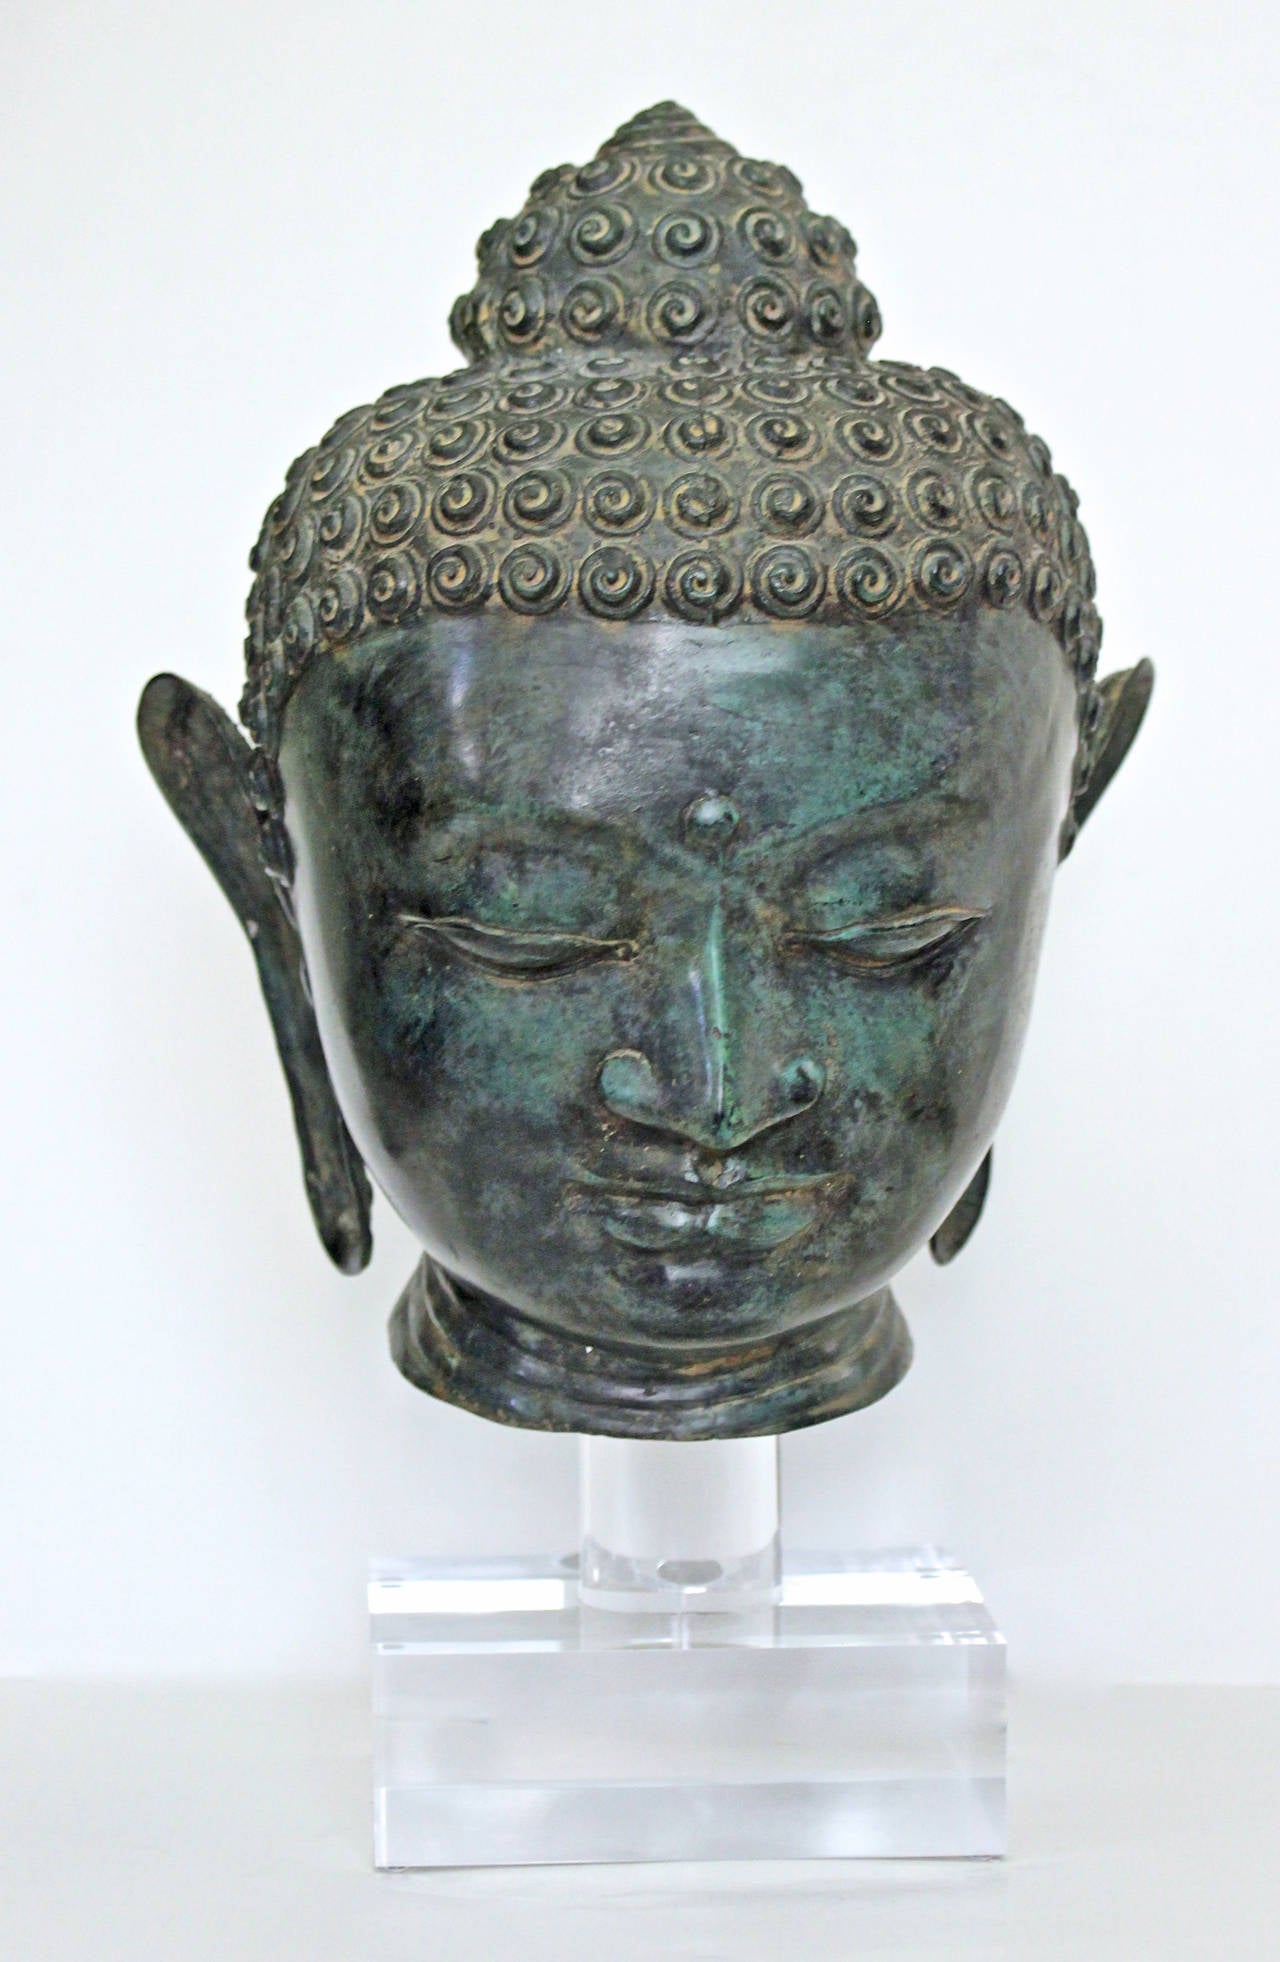 Burmese patinated bronze head of Buddha mounted on custom acrylic stand. The youthful face is peaceful and serine framed by elongated ear lobes. A striking art object with fine quality workmanship. Height of head 13